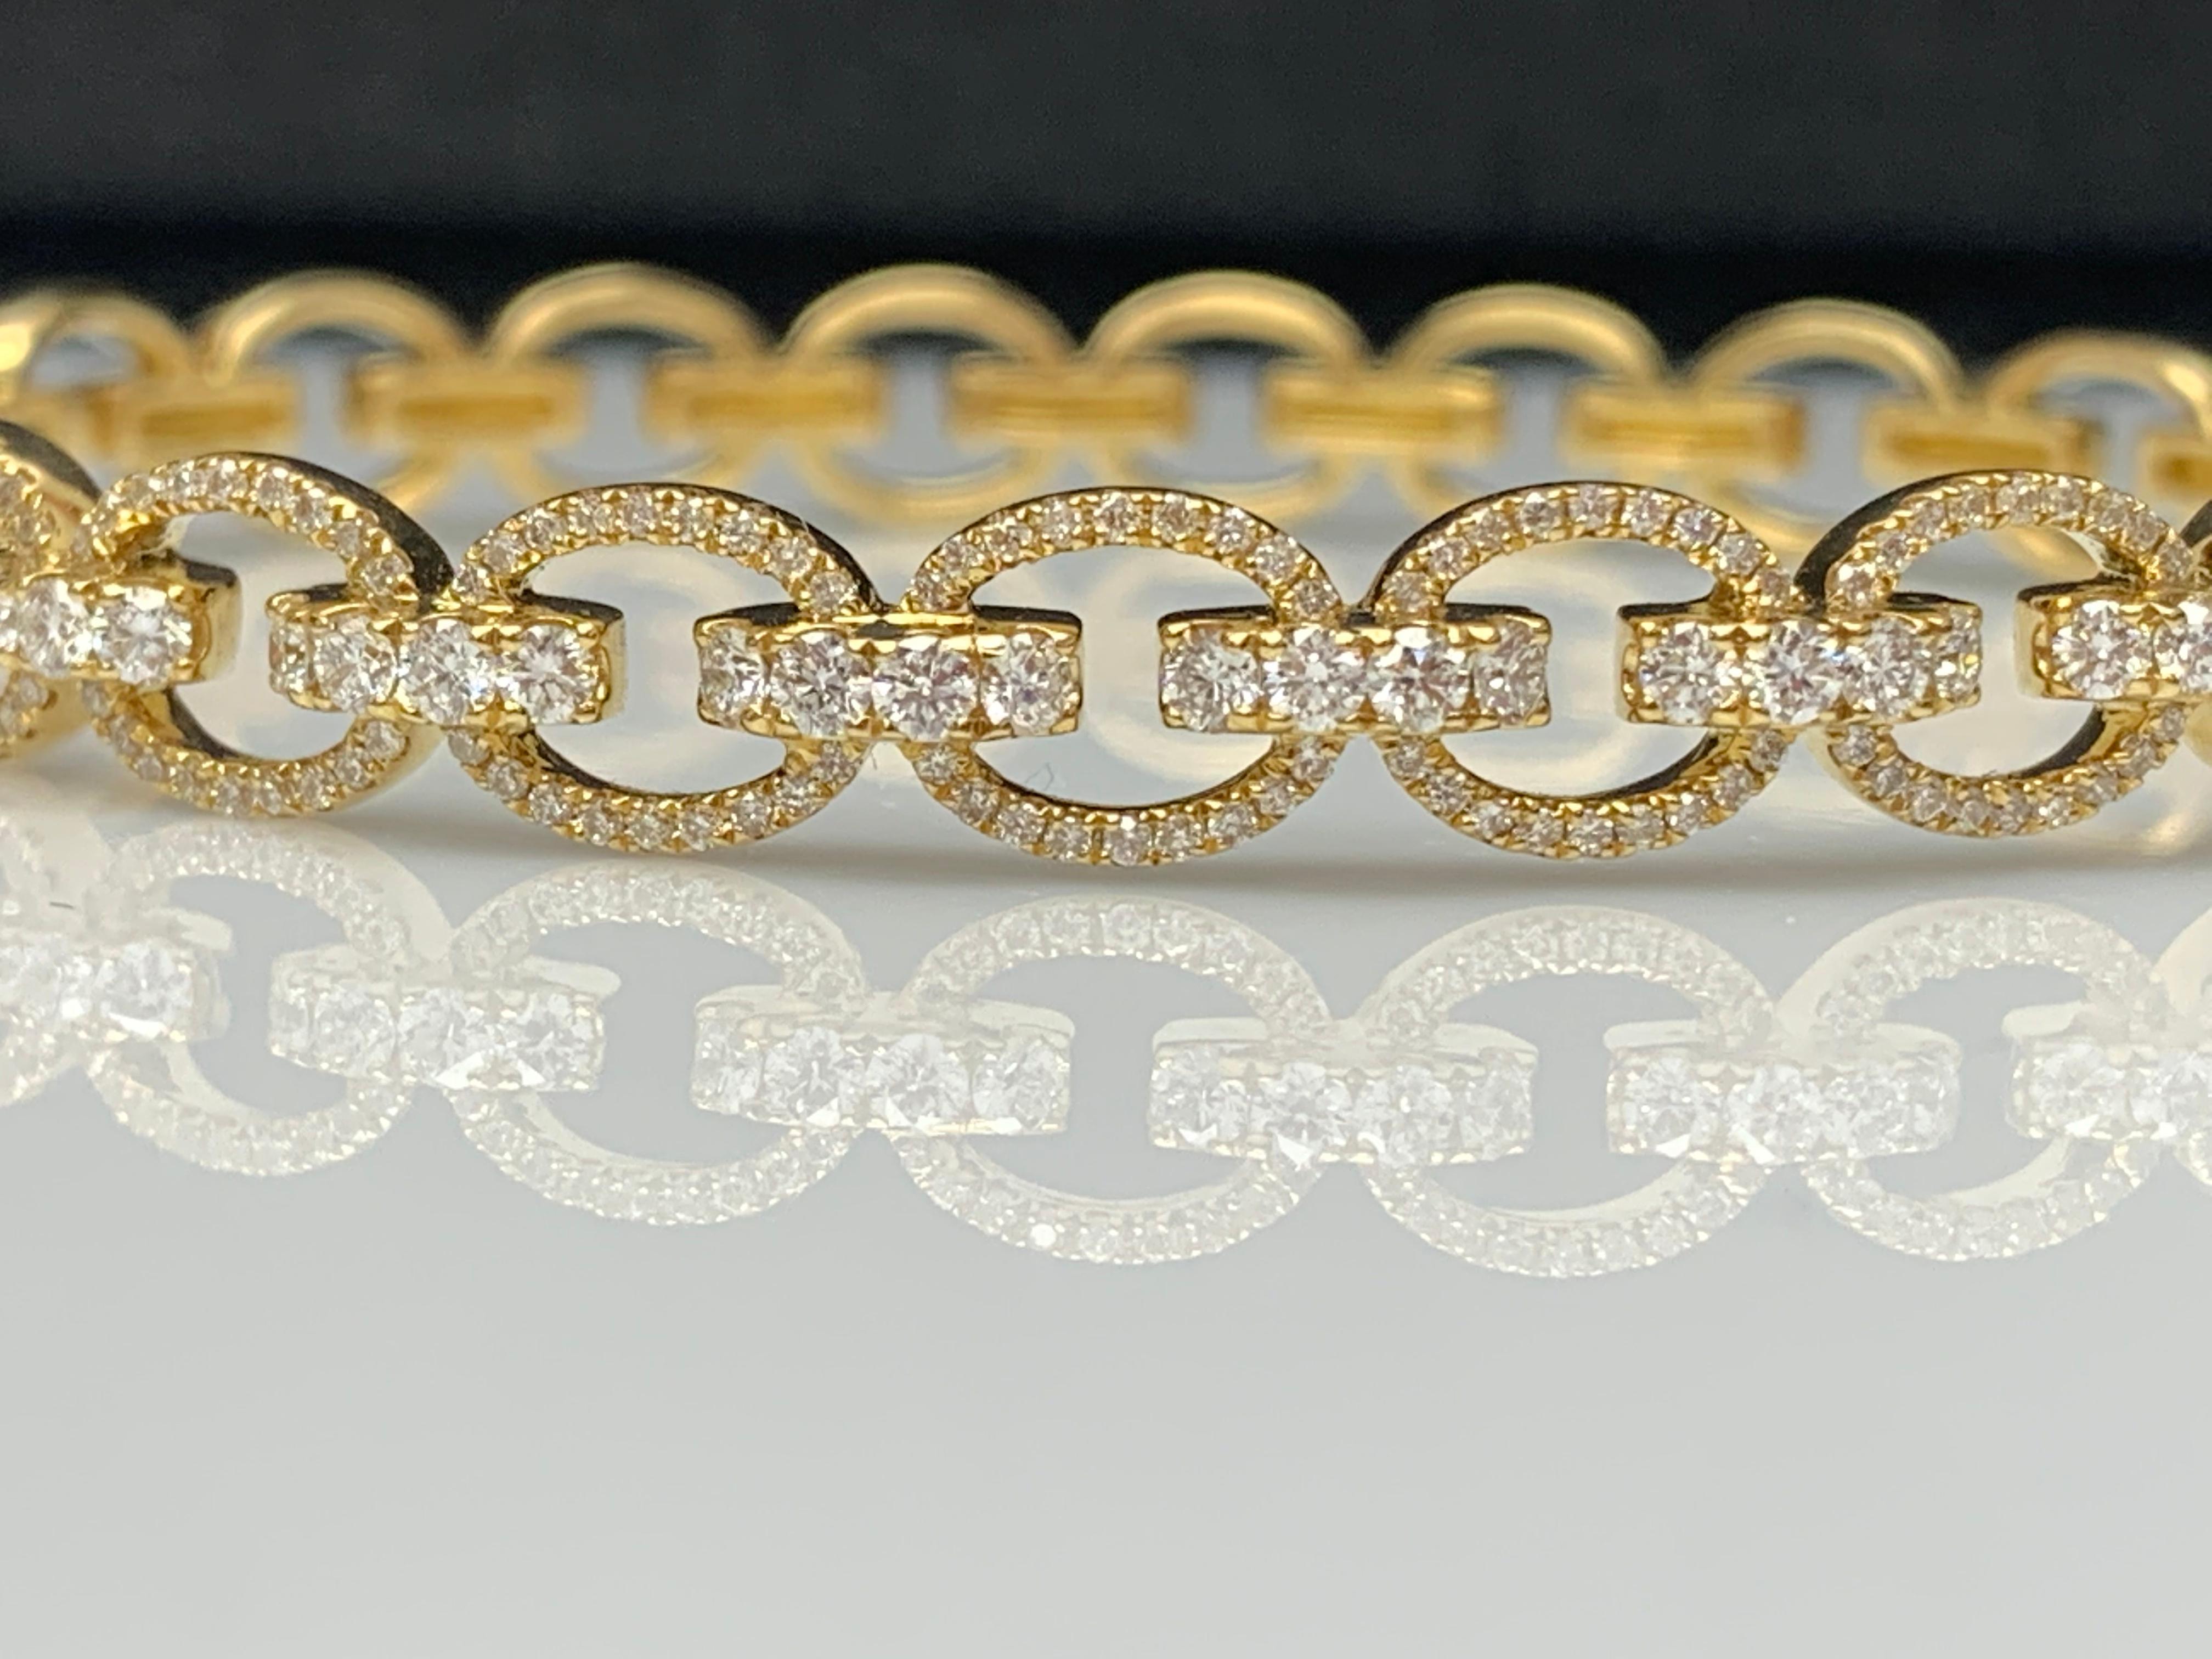 A beautiful and important bangle showcasing 1.59 carats of round brilliant diamonds big and small both, set in an intricately-designed open-work setting made in 18k yellow gold.

Style available in different price ranges. Prices are based on your